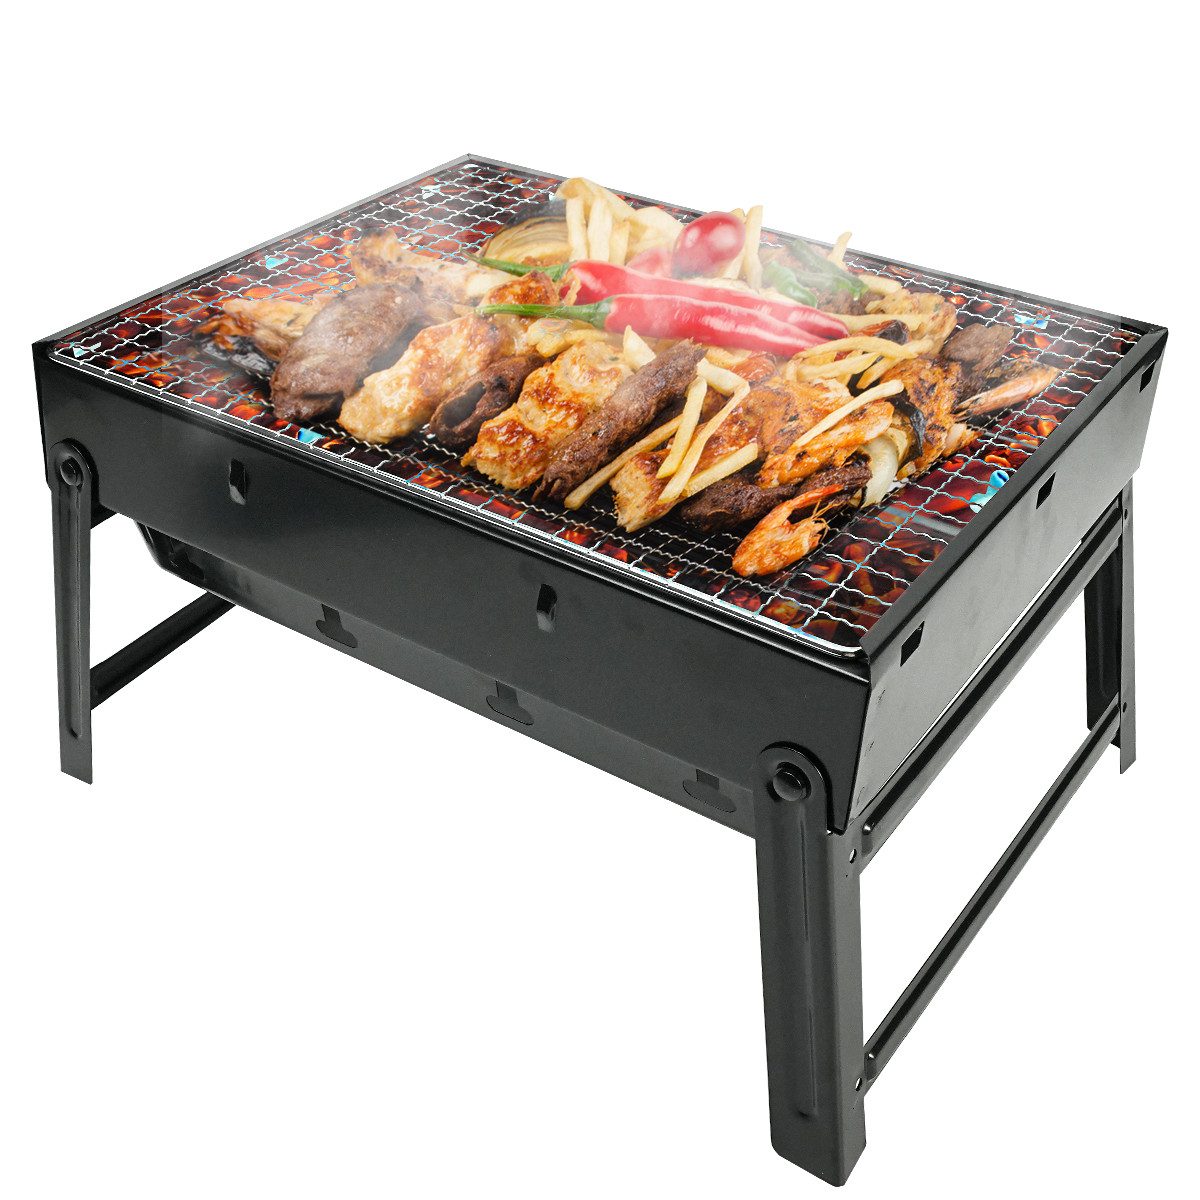 Sumosuma Standgrill Holzkohlegrill, Picknickgrill Edelstahl Kleiner Grill, Portable Campinggrill Abnehmbare BBQ Grills für Outdoor Garten Party